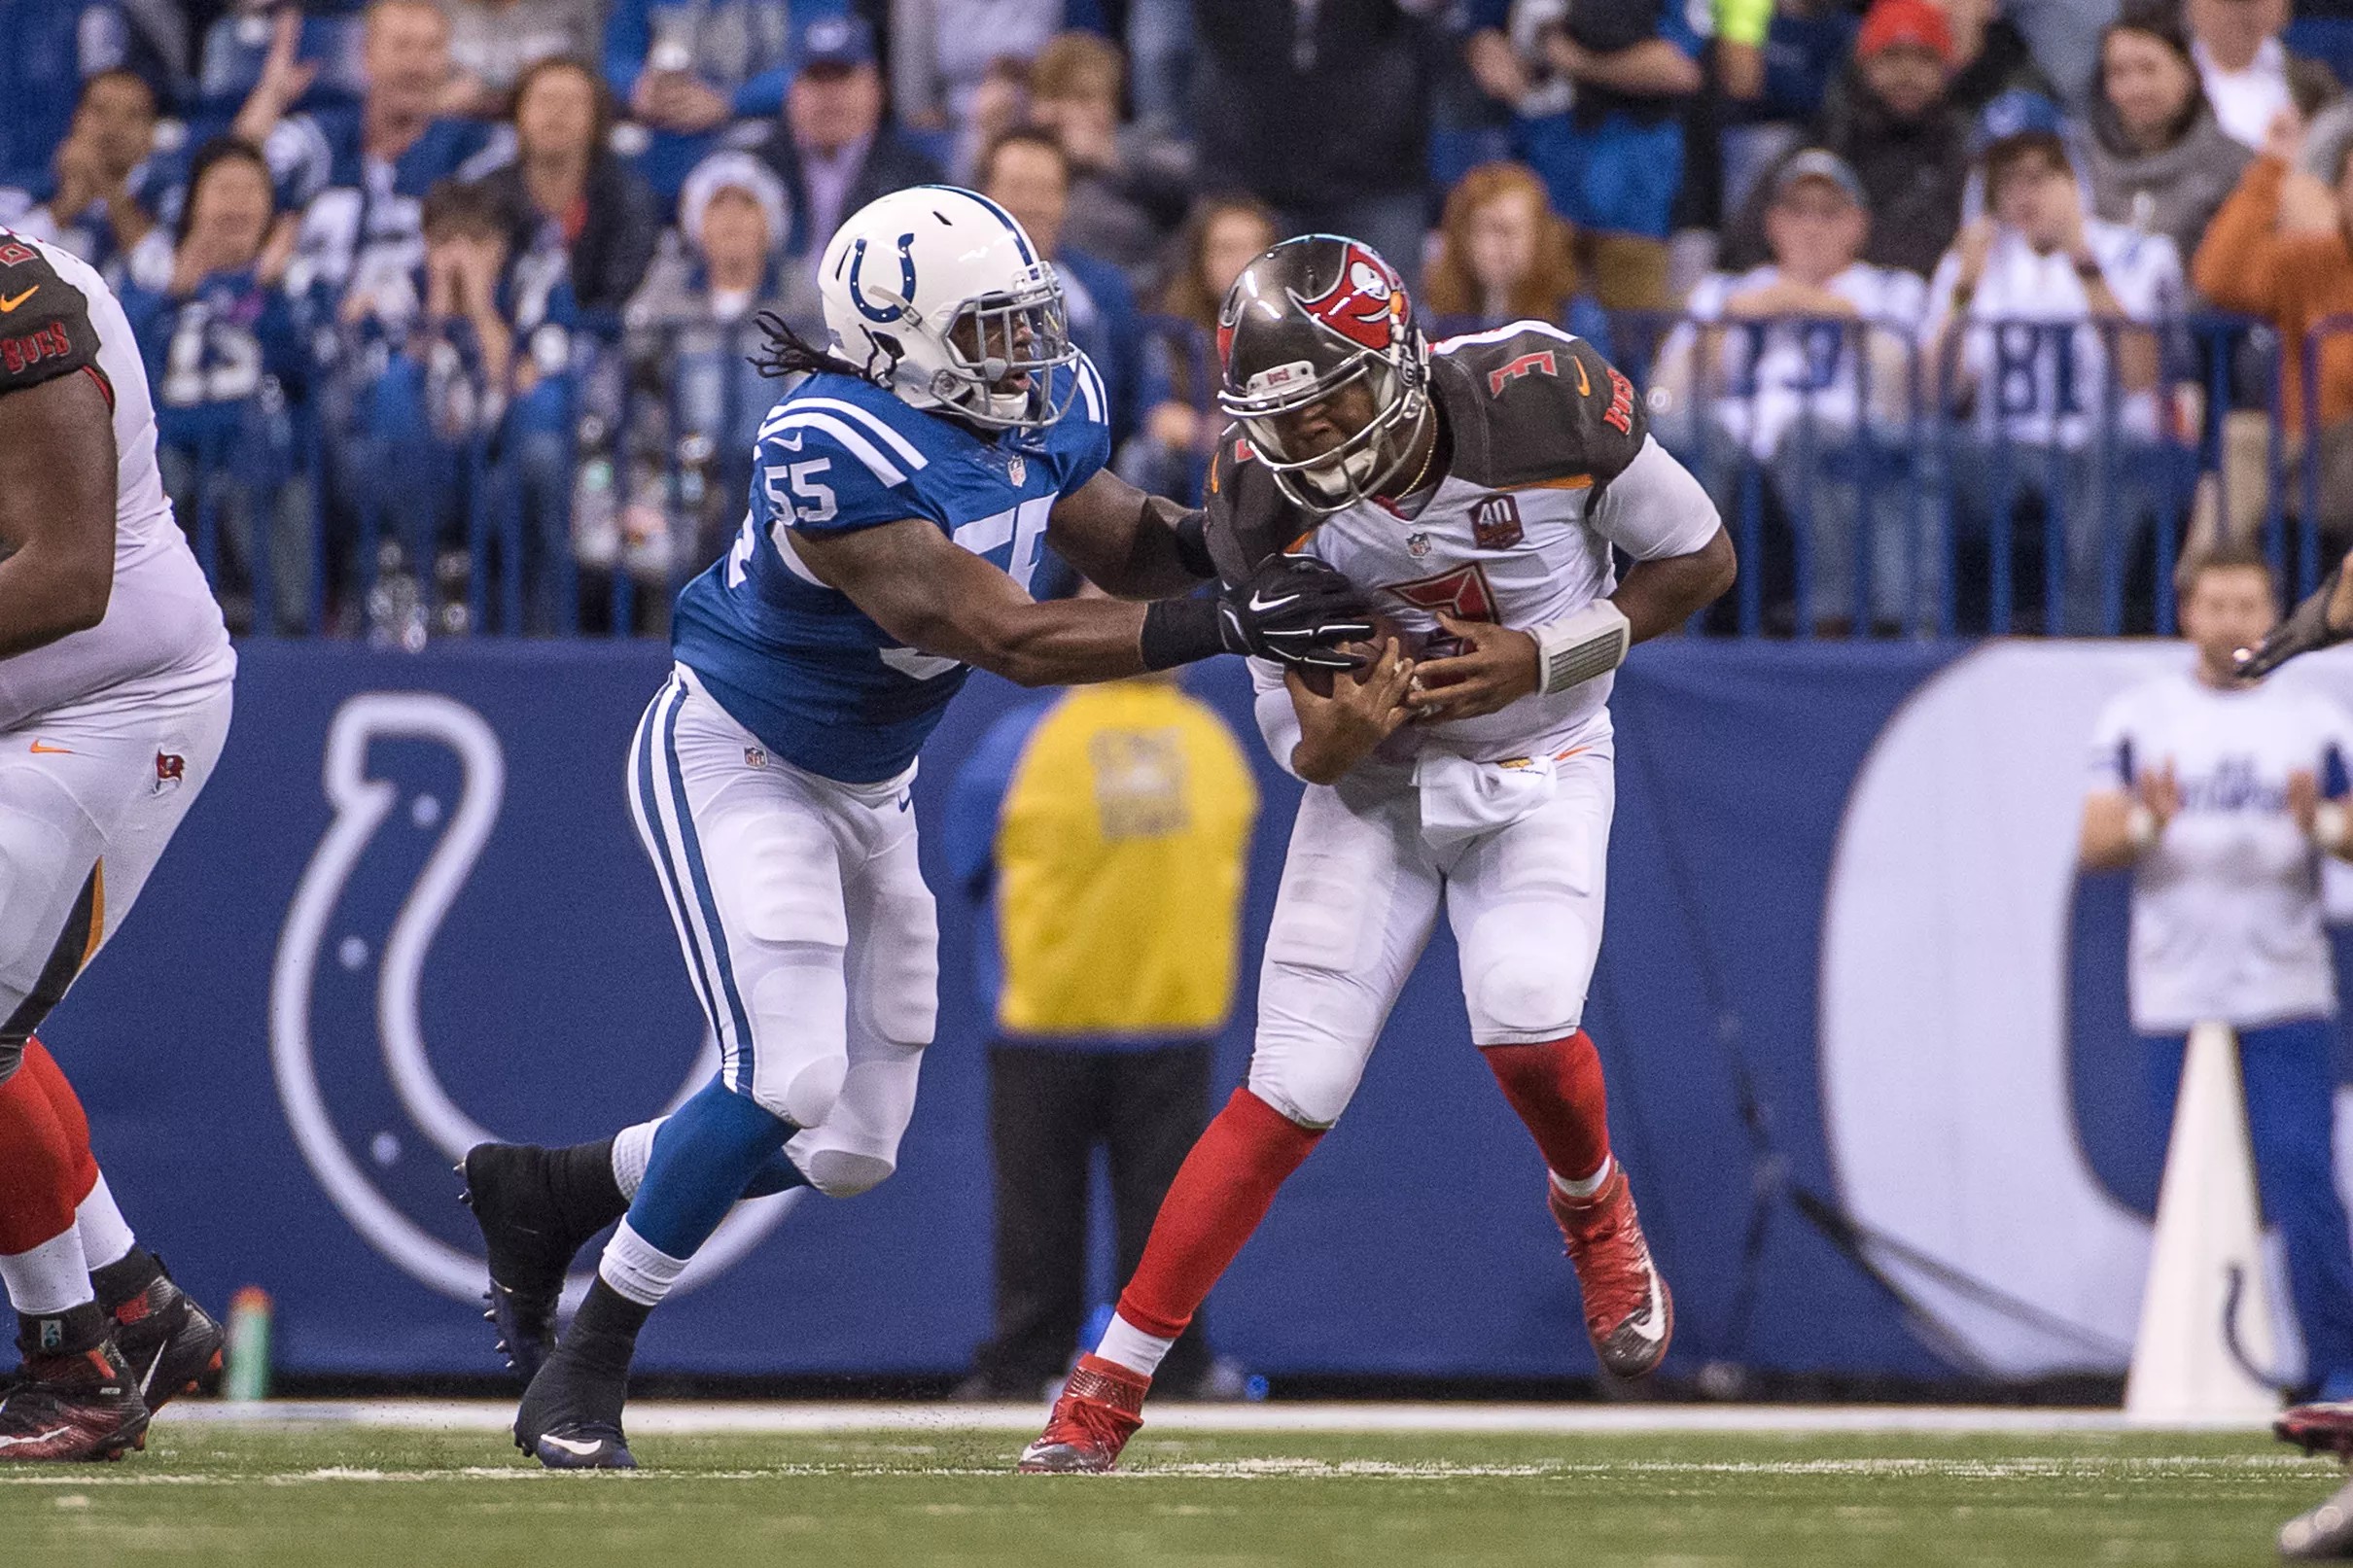 Colts vs Buccaneers Week 14 Game Time, TV Schedule, Radio Info, and More